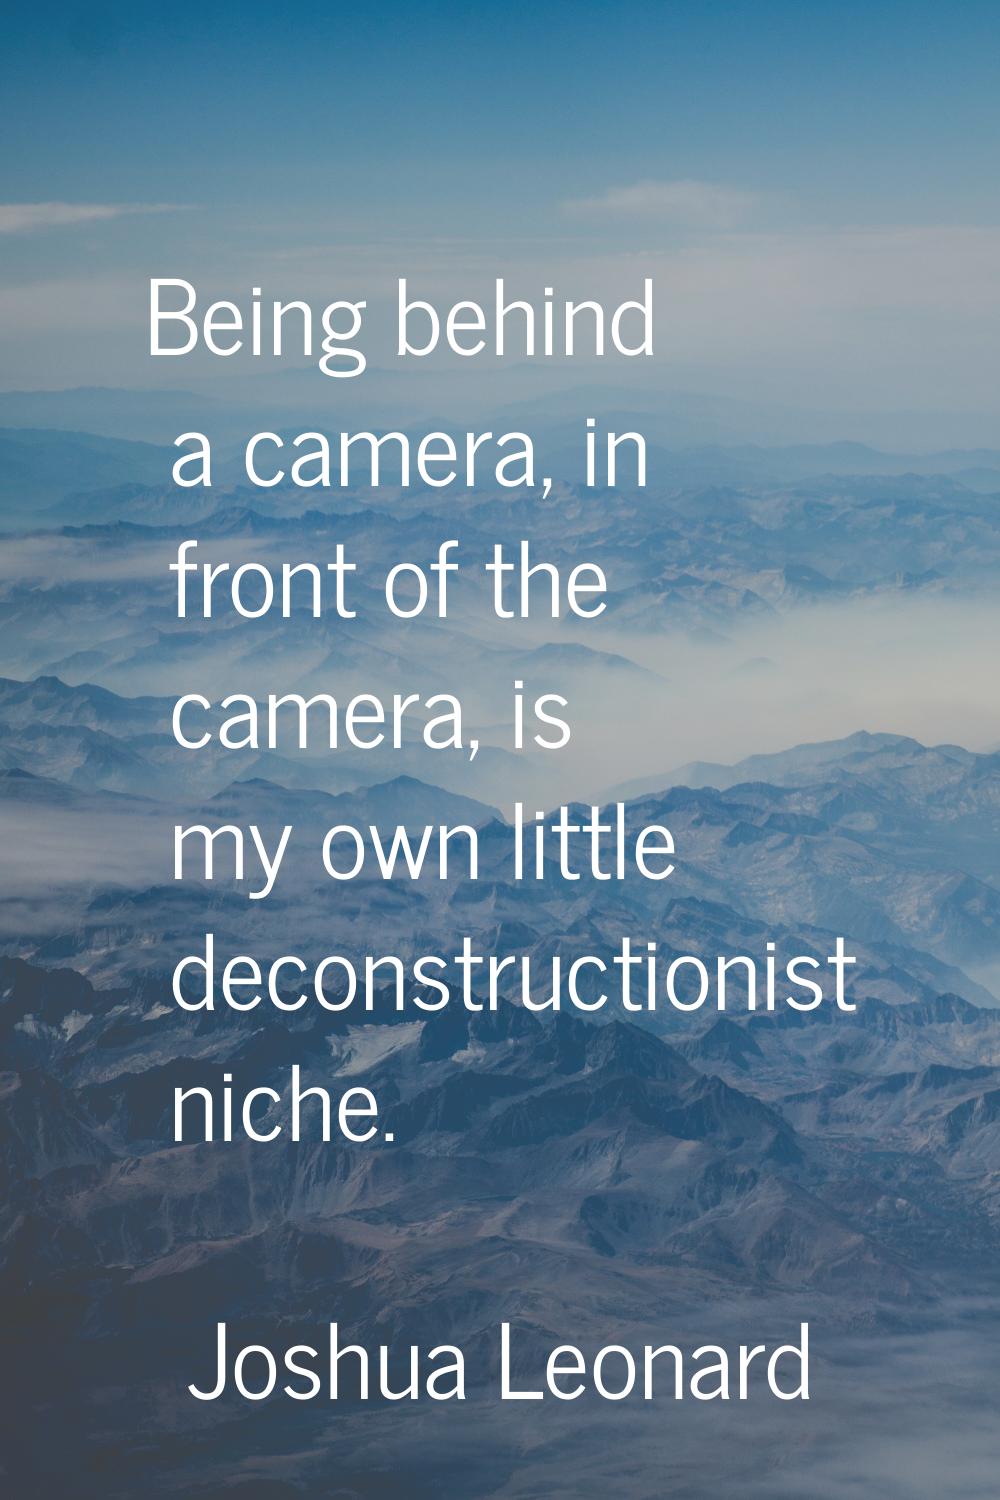 Being behind a camera, in front of the camera, is my own little deconstructionist niche.